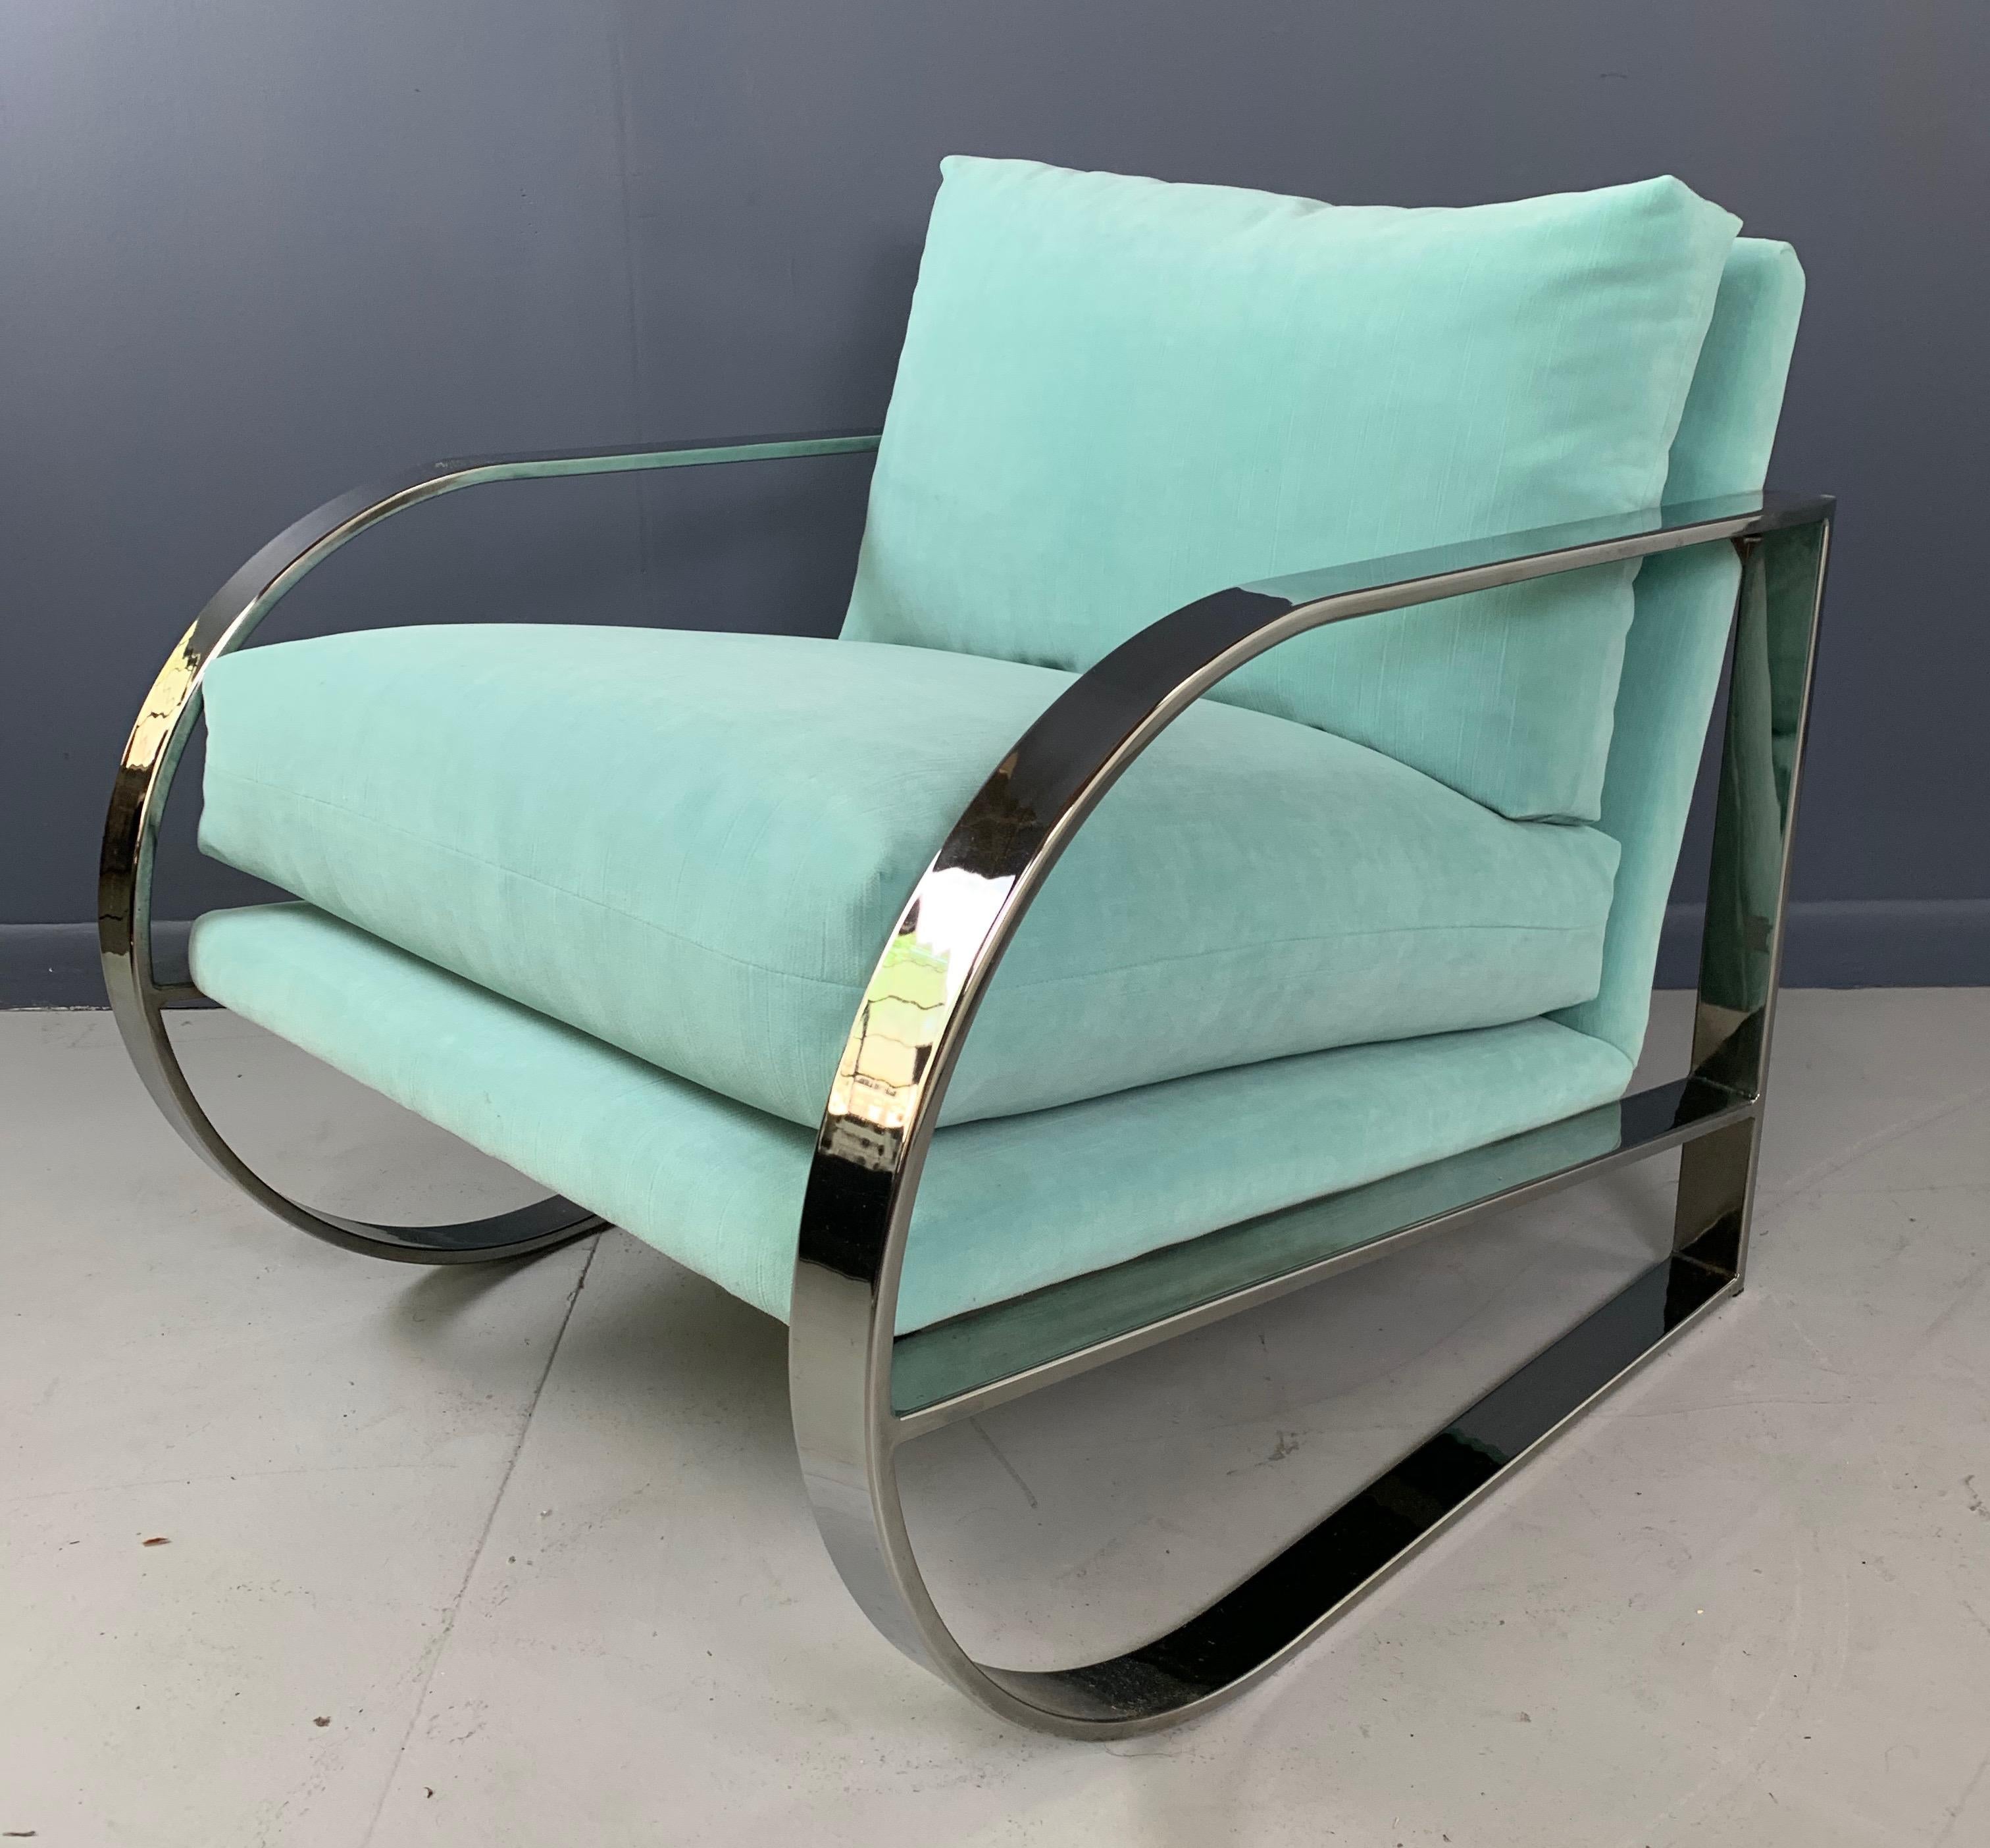 Geometric form lounge chairs designed by John Mascheroni for Swaim originals. Cantilevered chairs featuring flat banded chrome frames, newly upholstered in lovely velvet.